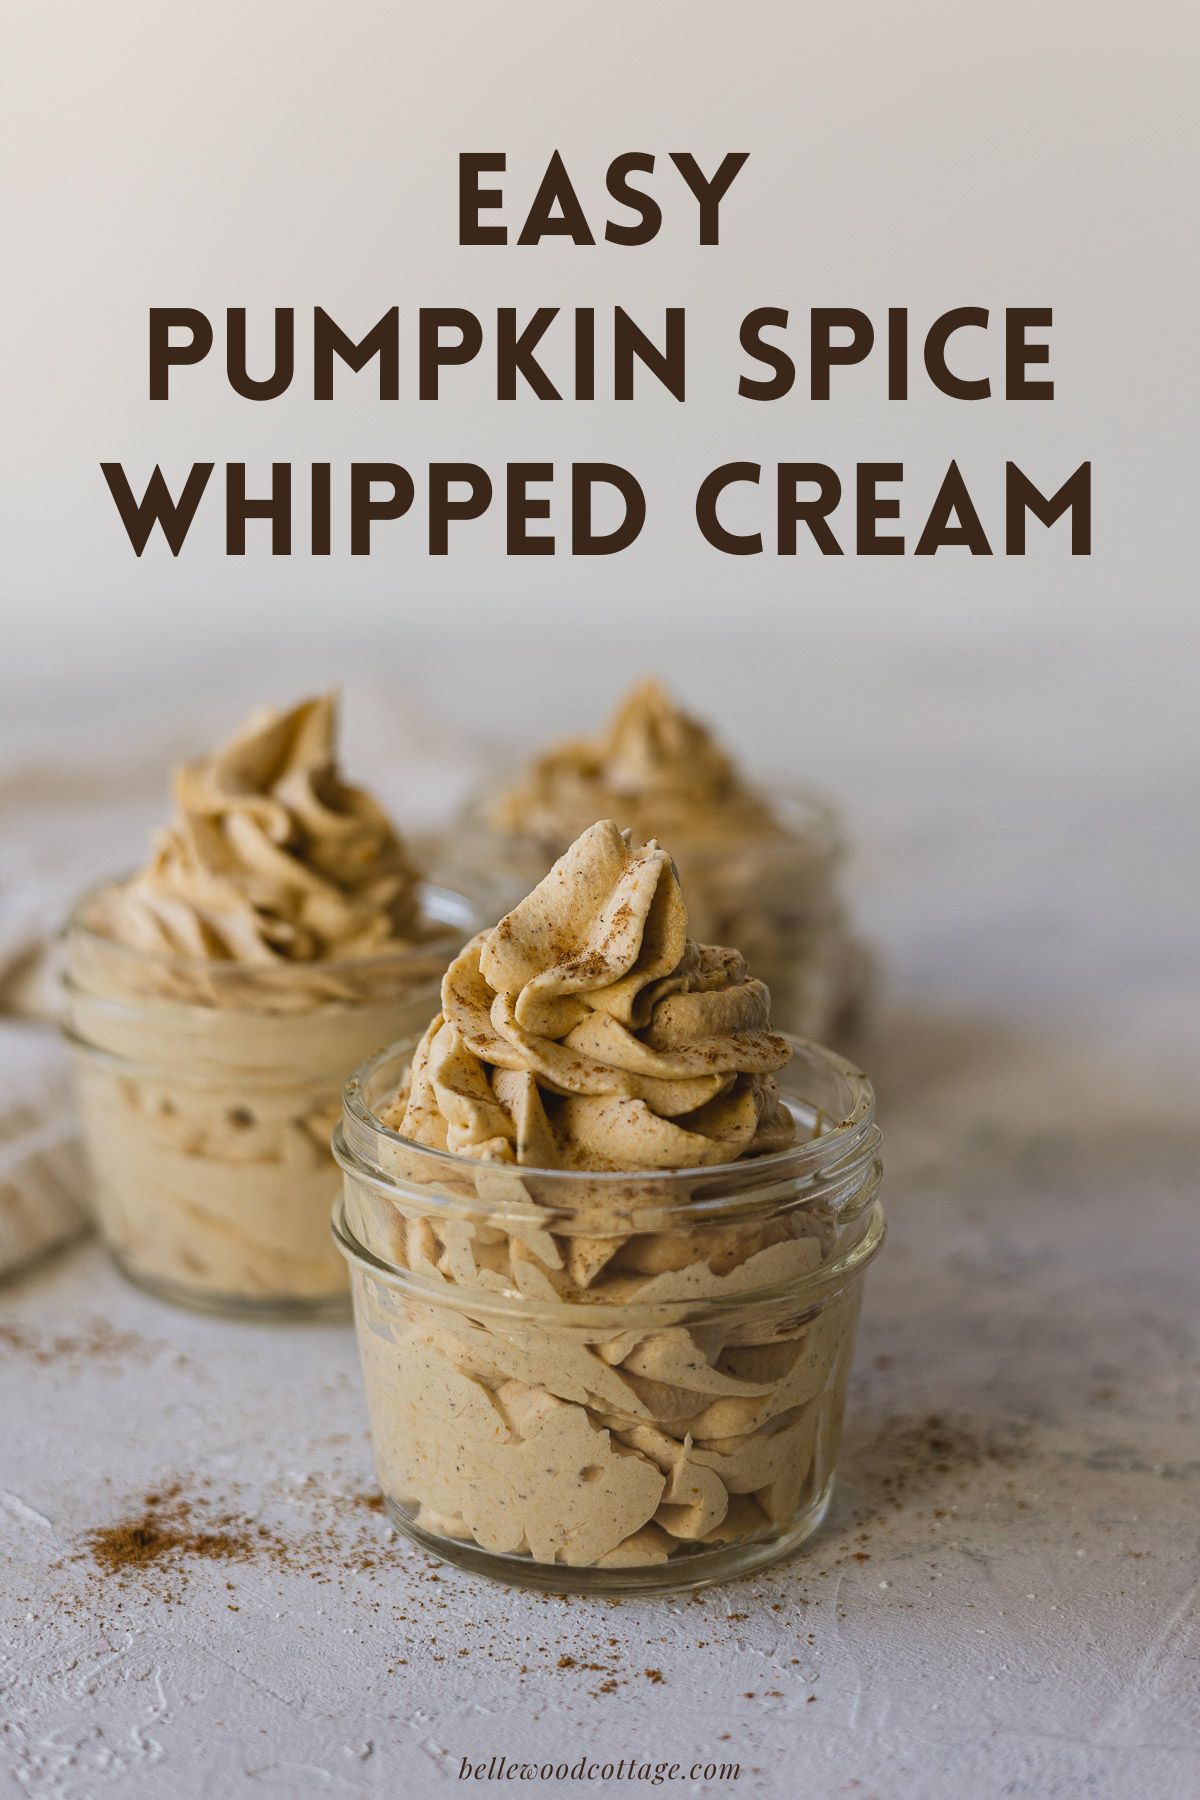 Whipped Cream sprinkled with cinnamon in mason jars with the words, "Easy Pumpkin Spice Whipped Cream."